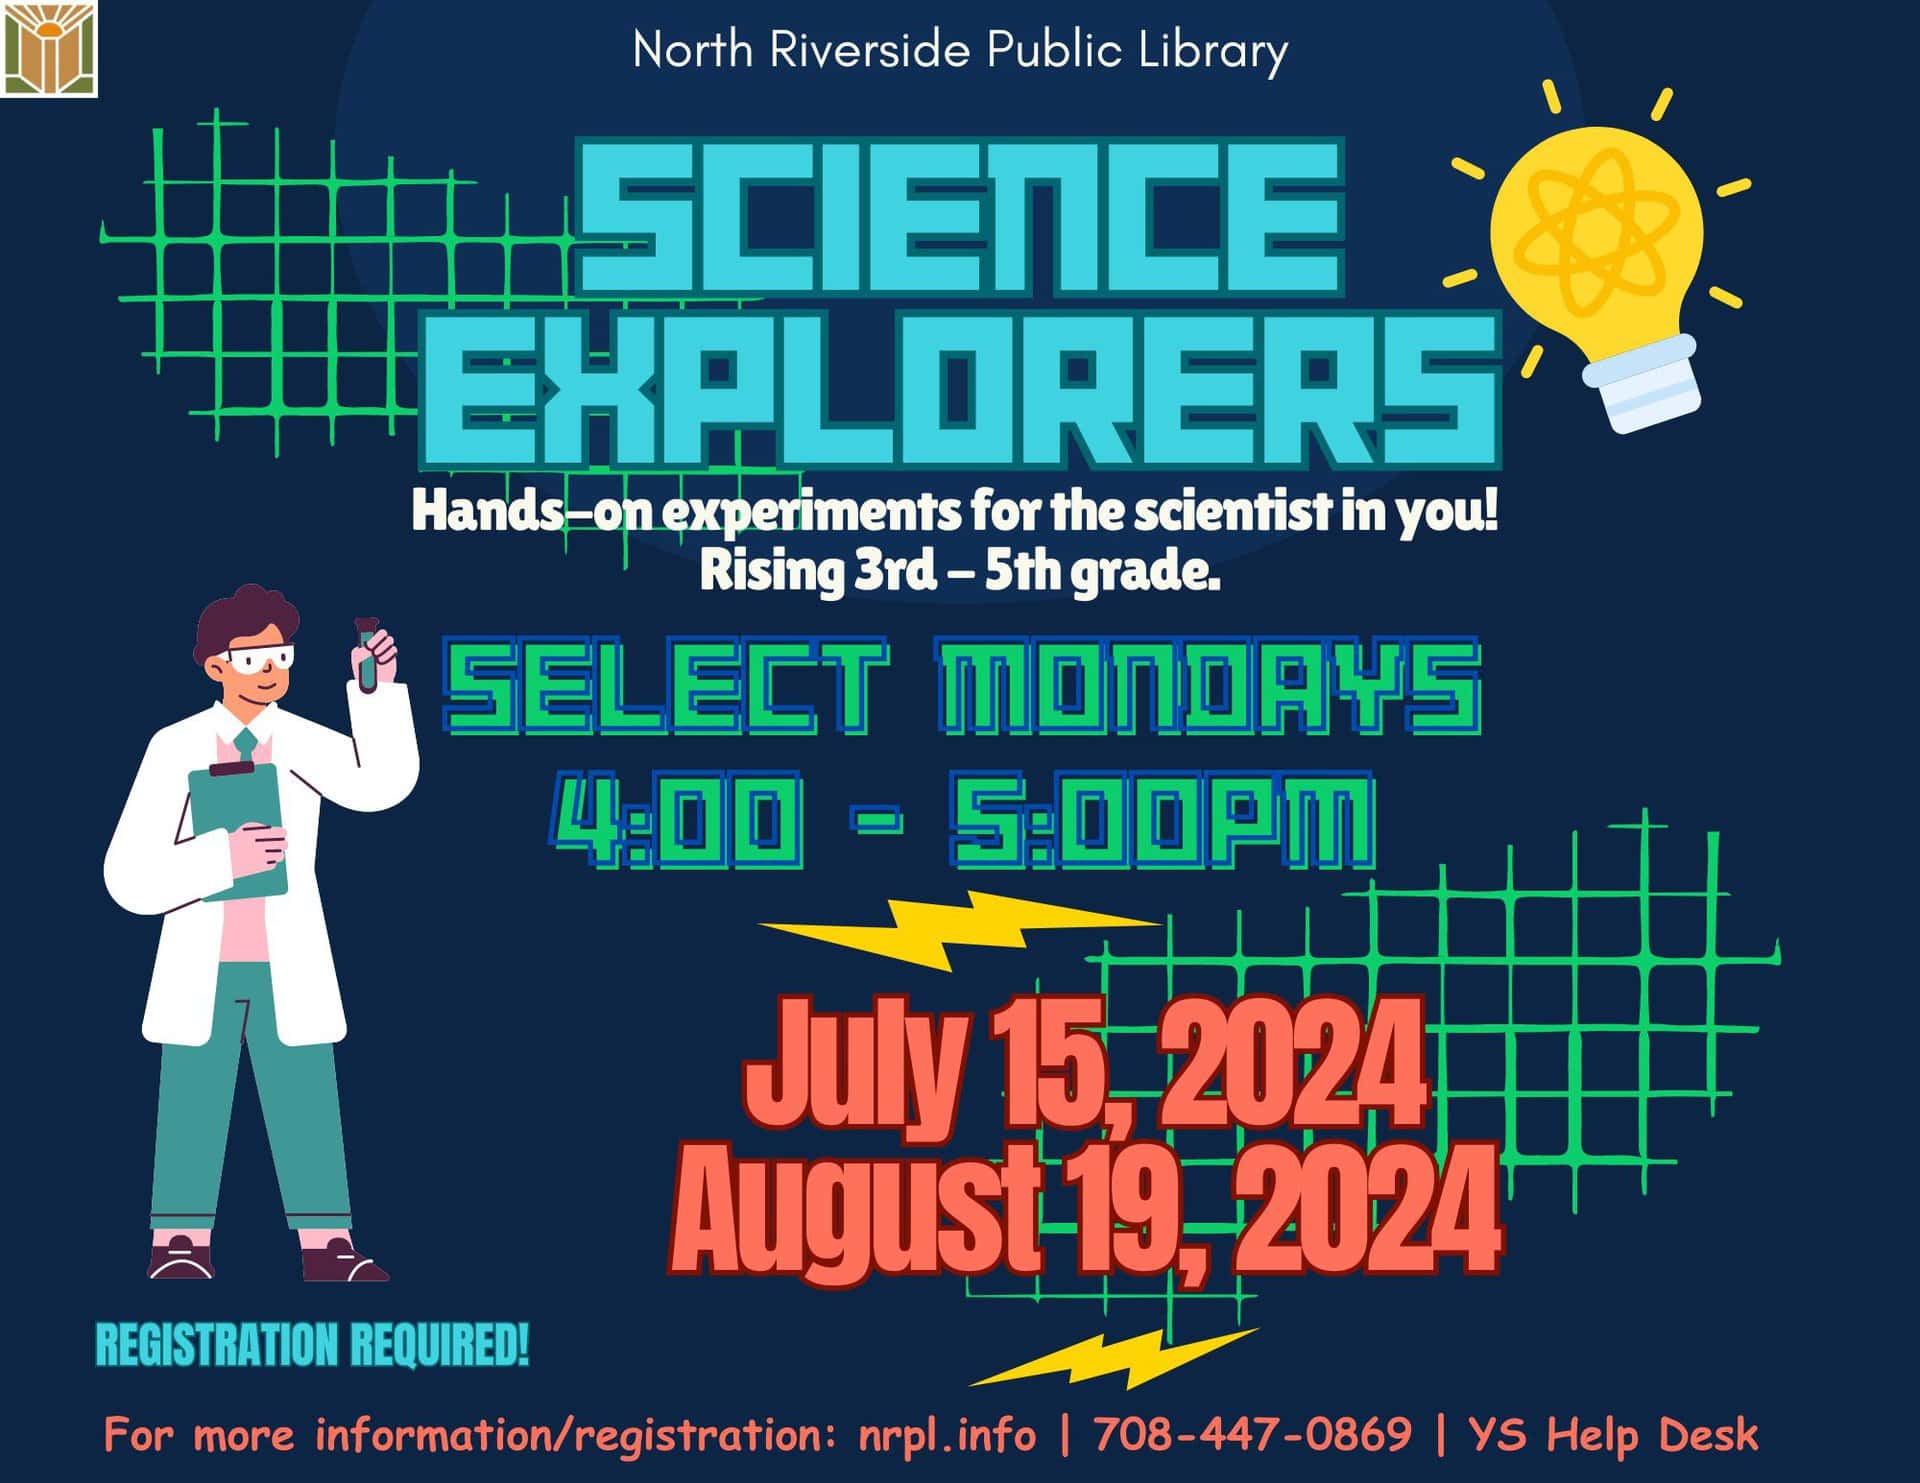 Science Explorers. Select Mondays 4 – 5 pm. July 15 & August 19. Hands- on experiments for the scientist in you! For rising 3rd graders to rising 5th graders.